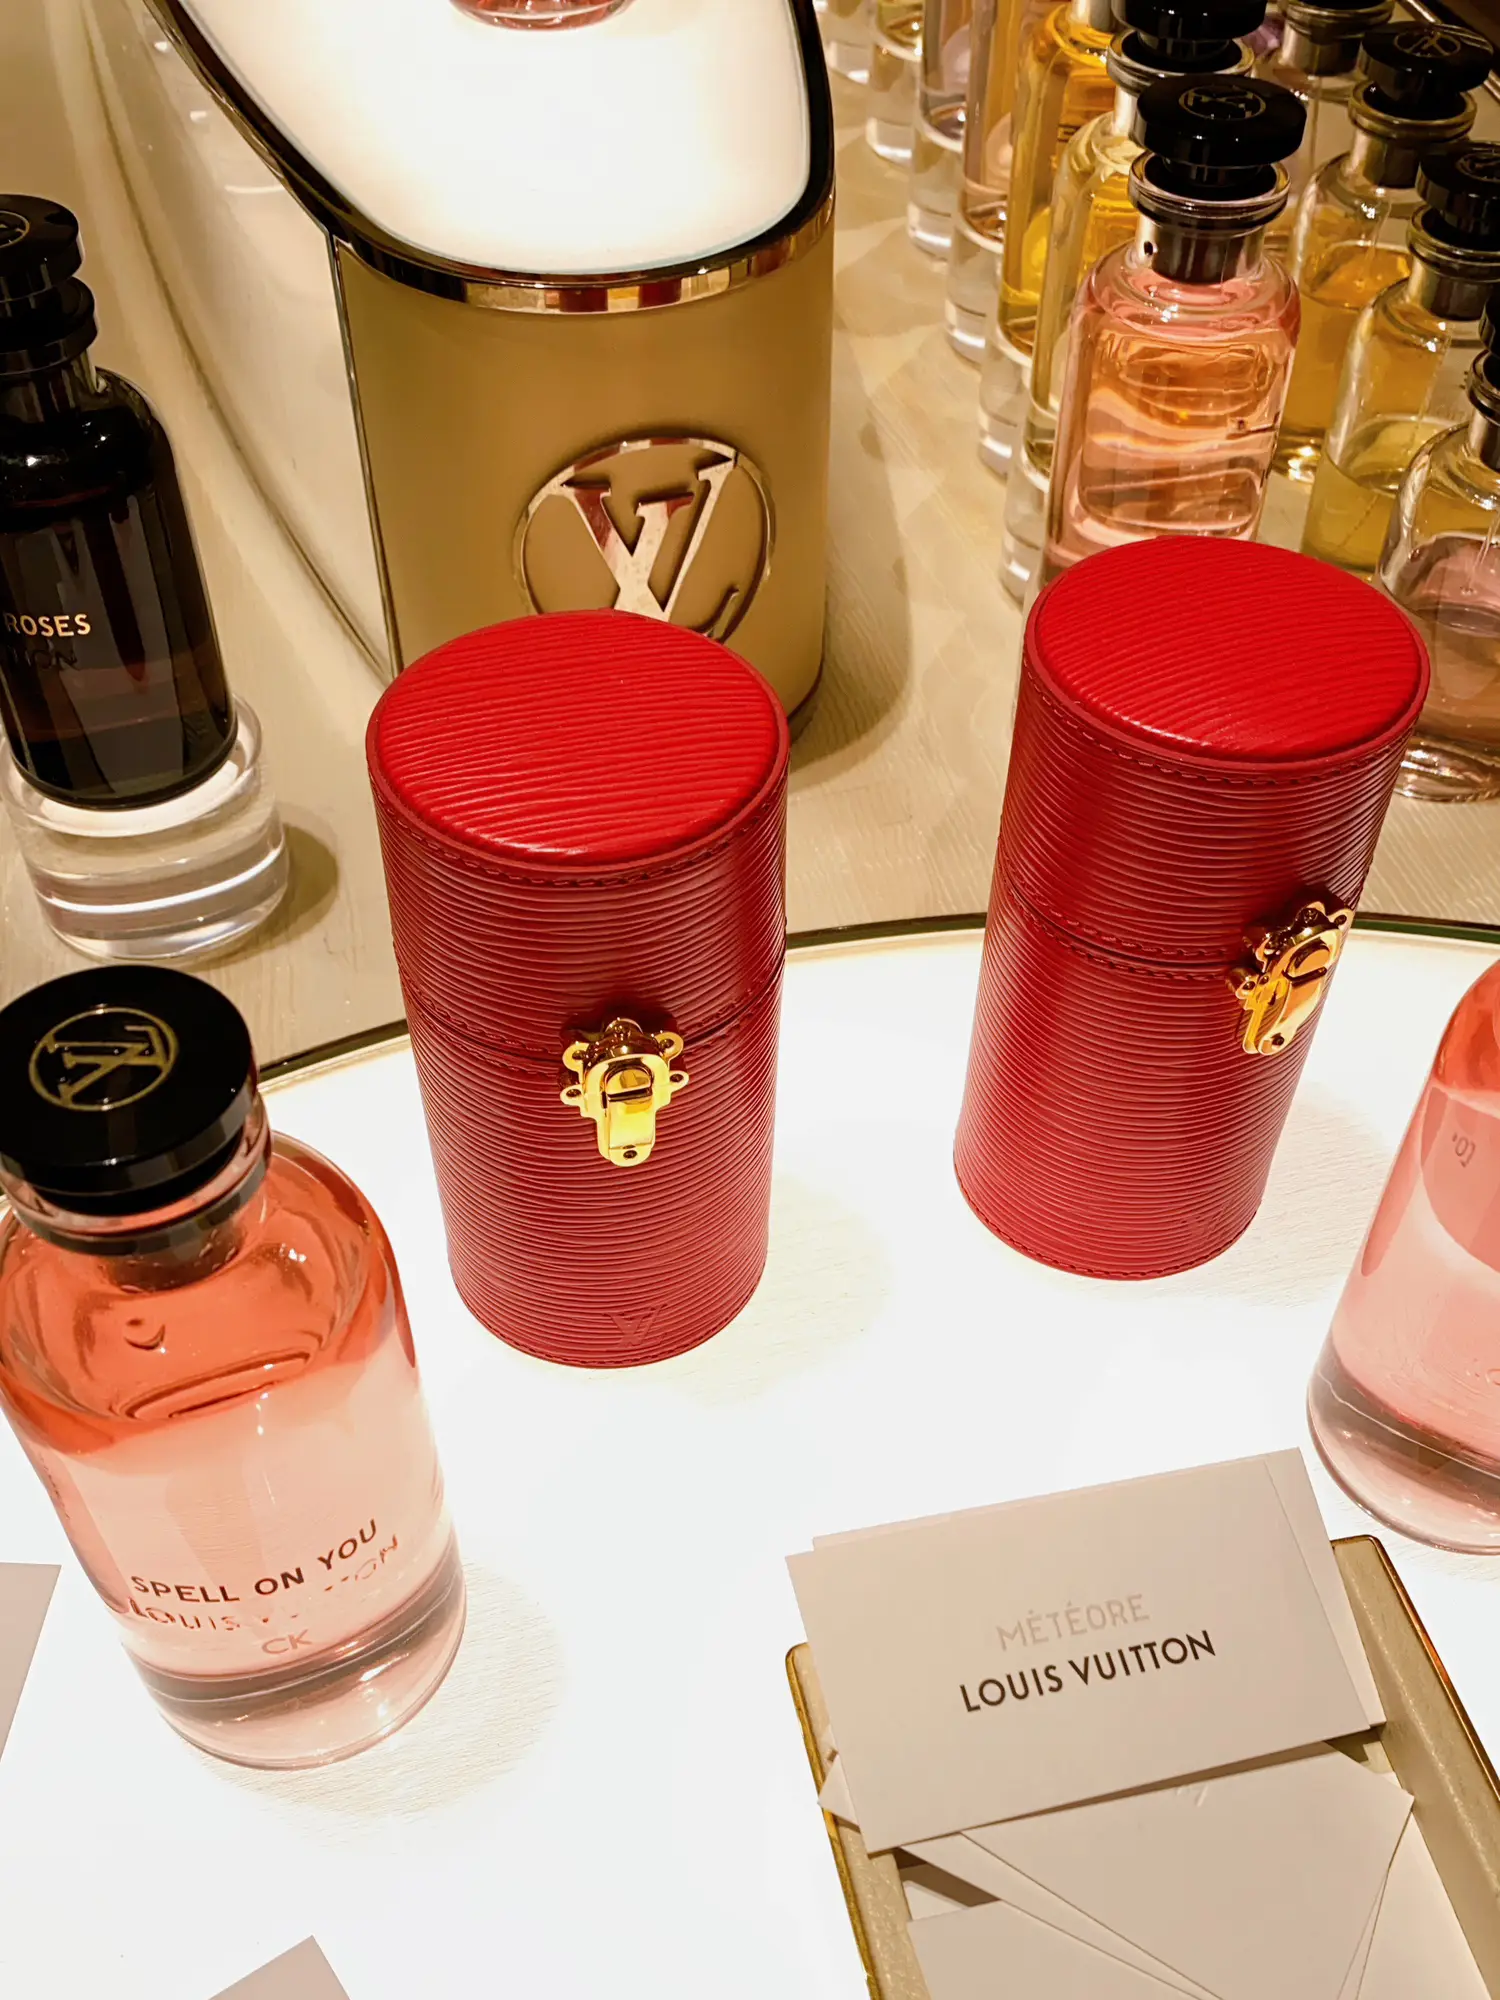 LOUIS VUITTON METEORE – Rich and Luxe